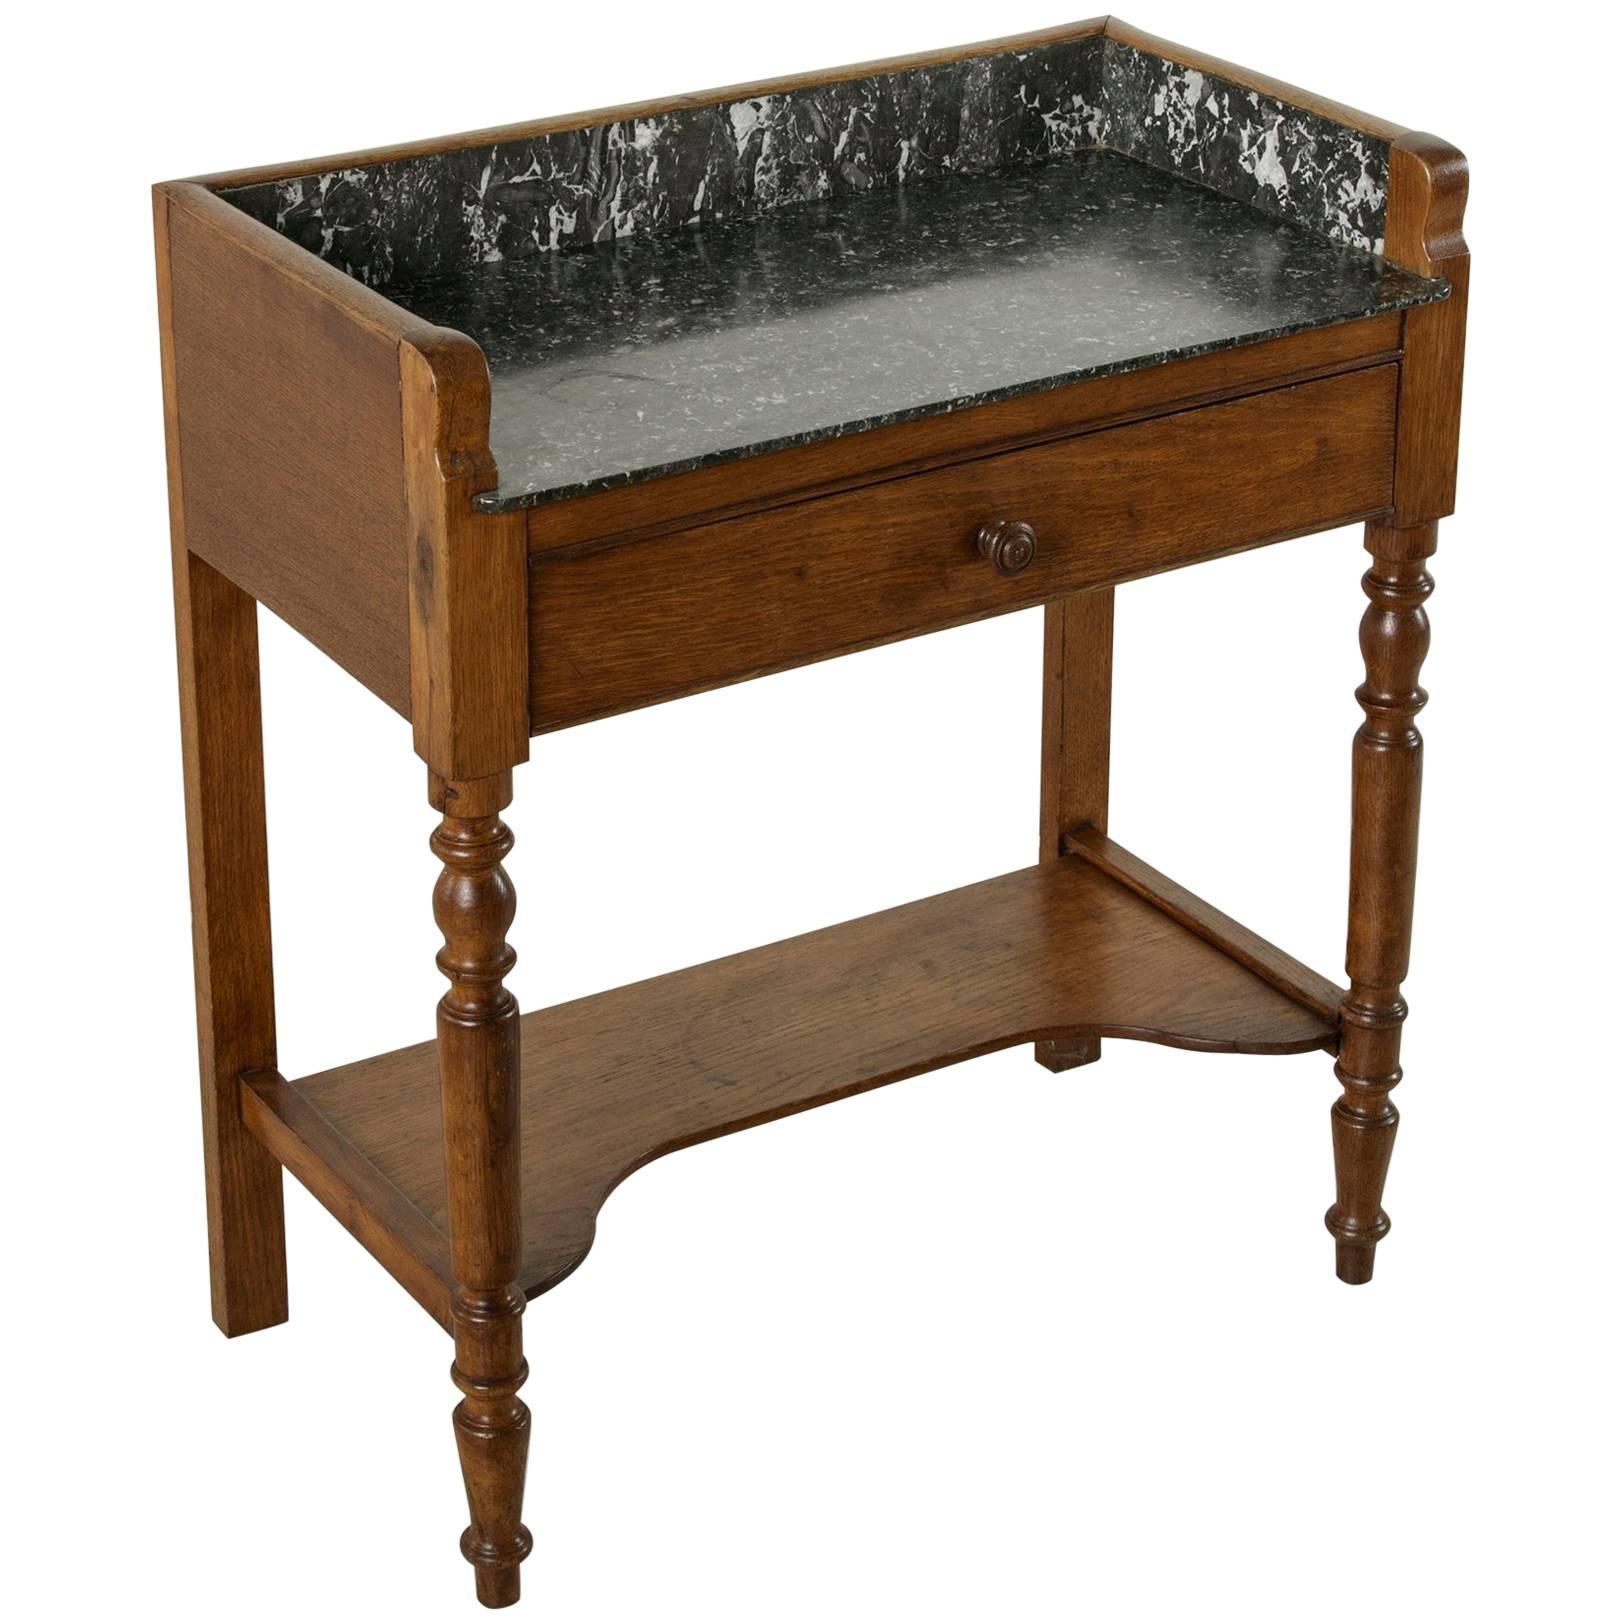 Late 19th Century French Oak Console Table or Dry Bar with Saint Anne Marble Top